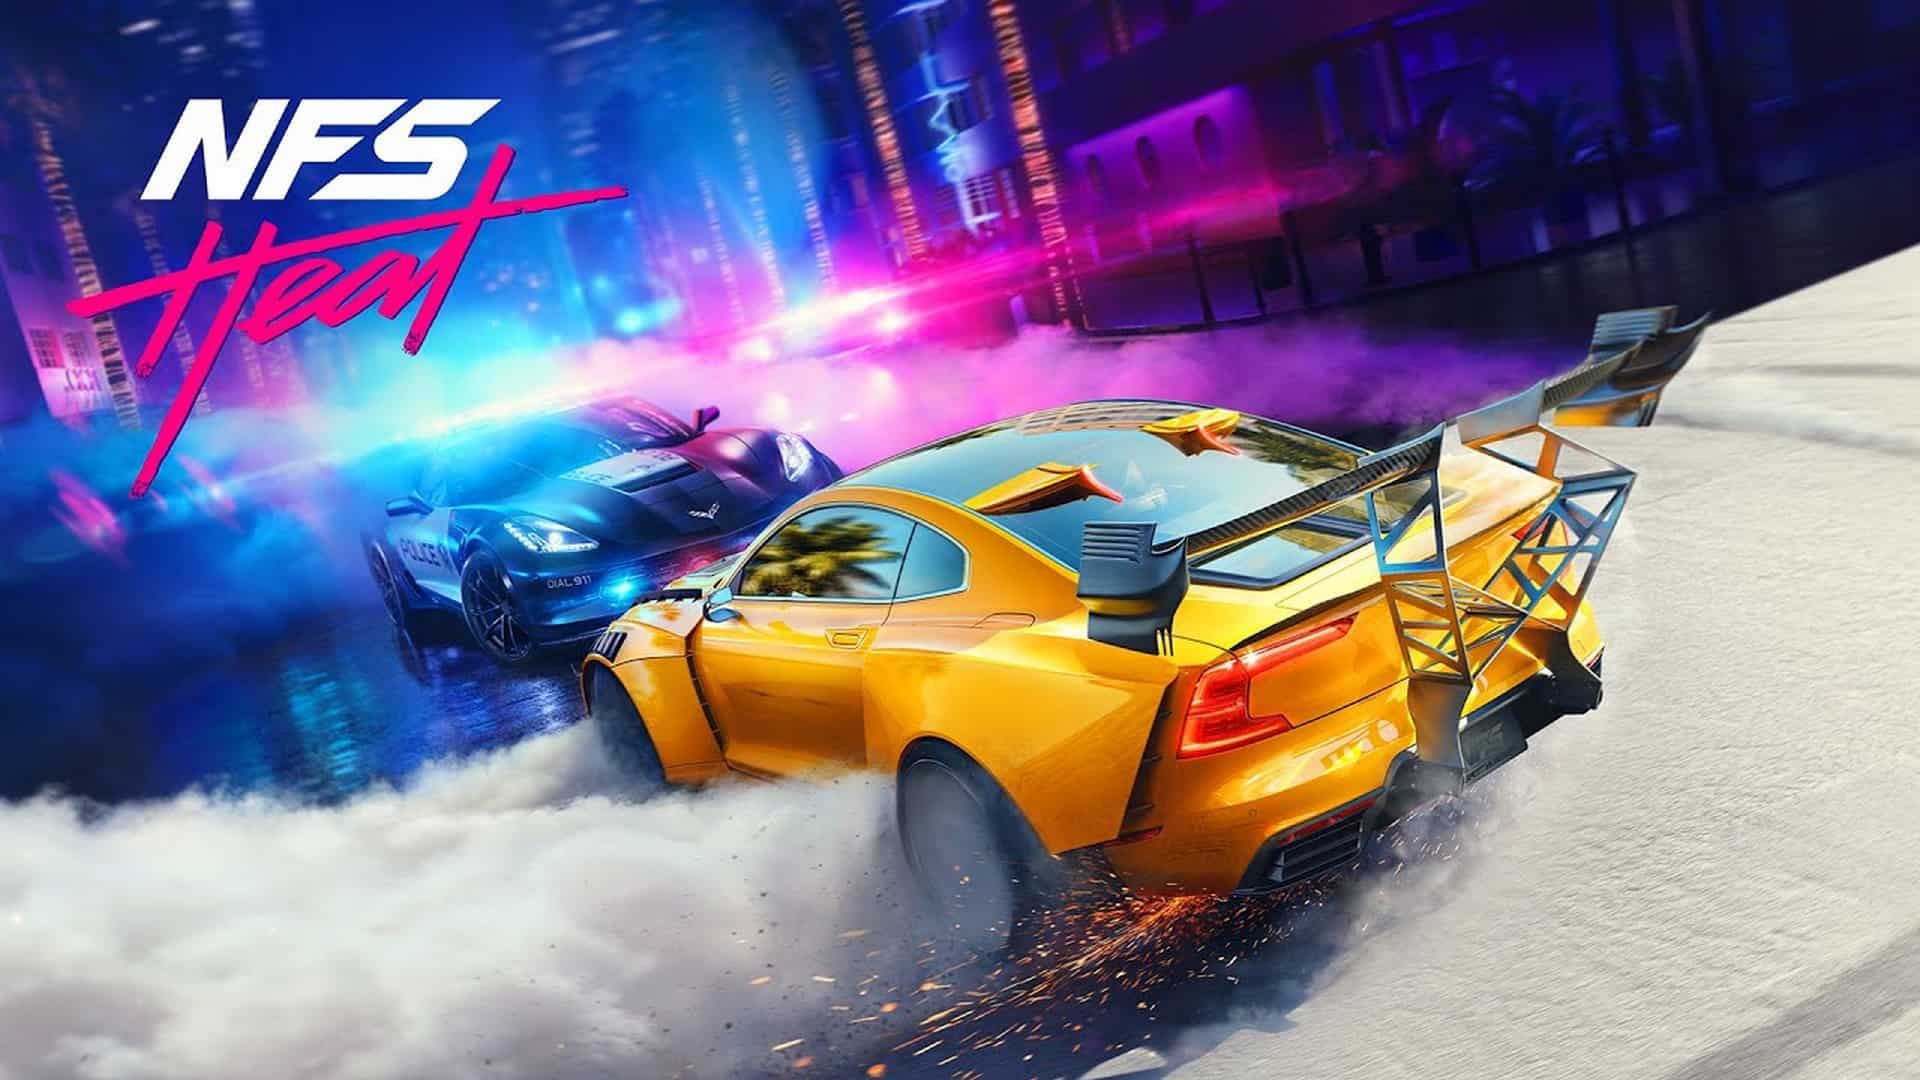 Augmented Reality Makes NFS Heat Studio Creations Come Alive | MKAU Gaming